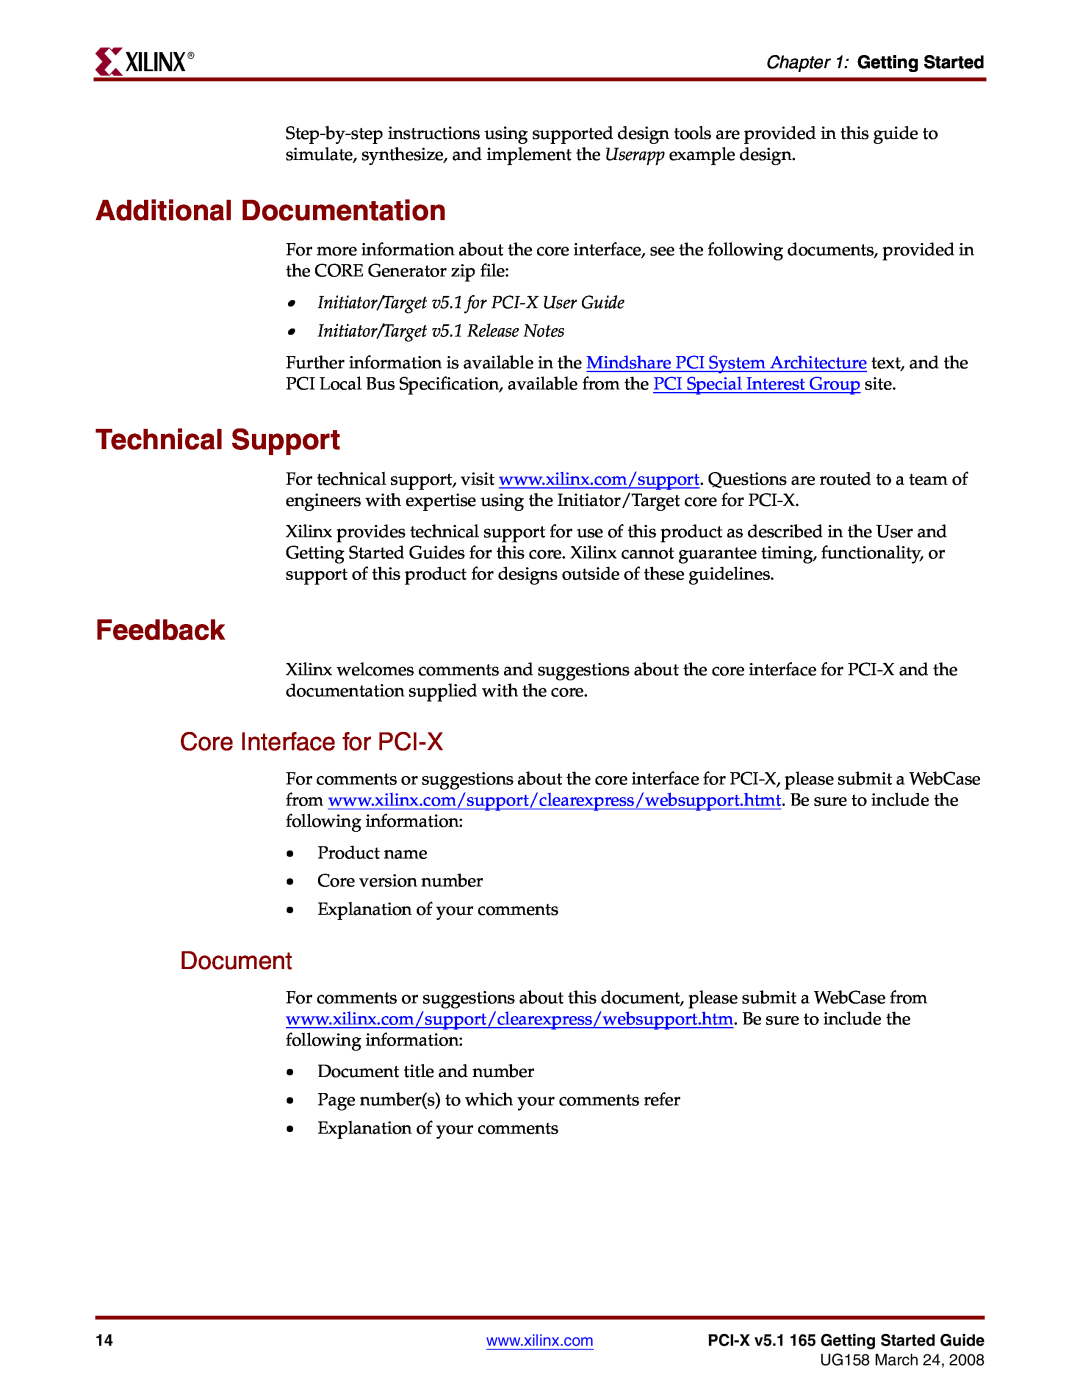 Xilinx PCI-X v5.1 manual Additional Documentation, Technical Support, Feedback, Core Interface for PCI-X, Getting Started 